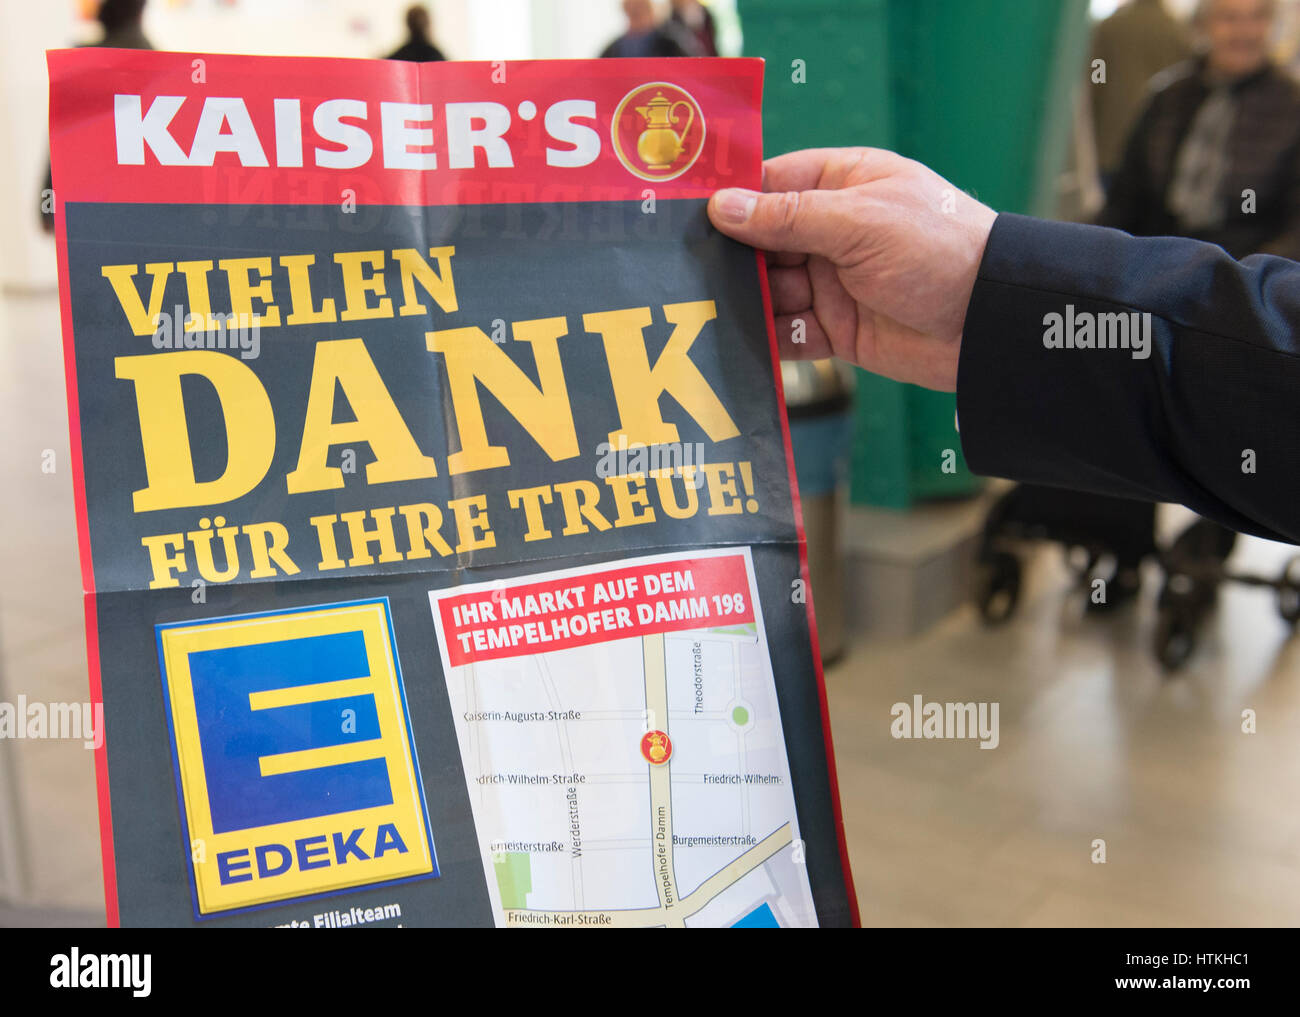 Berlin, Germany. 13th Mar, 2017. ILLUSTRATION - 'Thank you for your loyalty!' reads a brochure at a new branch of the German supermarket chain Edeka in Berlin, Germany, 13 March 2017. The business belonged to the former Kaiser's chain, which is now being integrated into Edeka after being taken over by the group. Photo: Paul Zinken/dpa/Alamy Live News Stock Photo